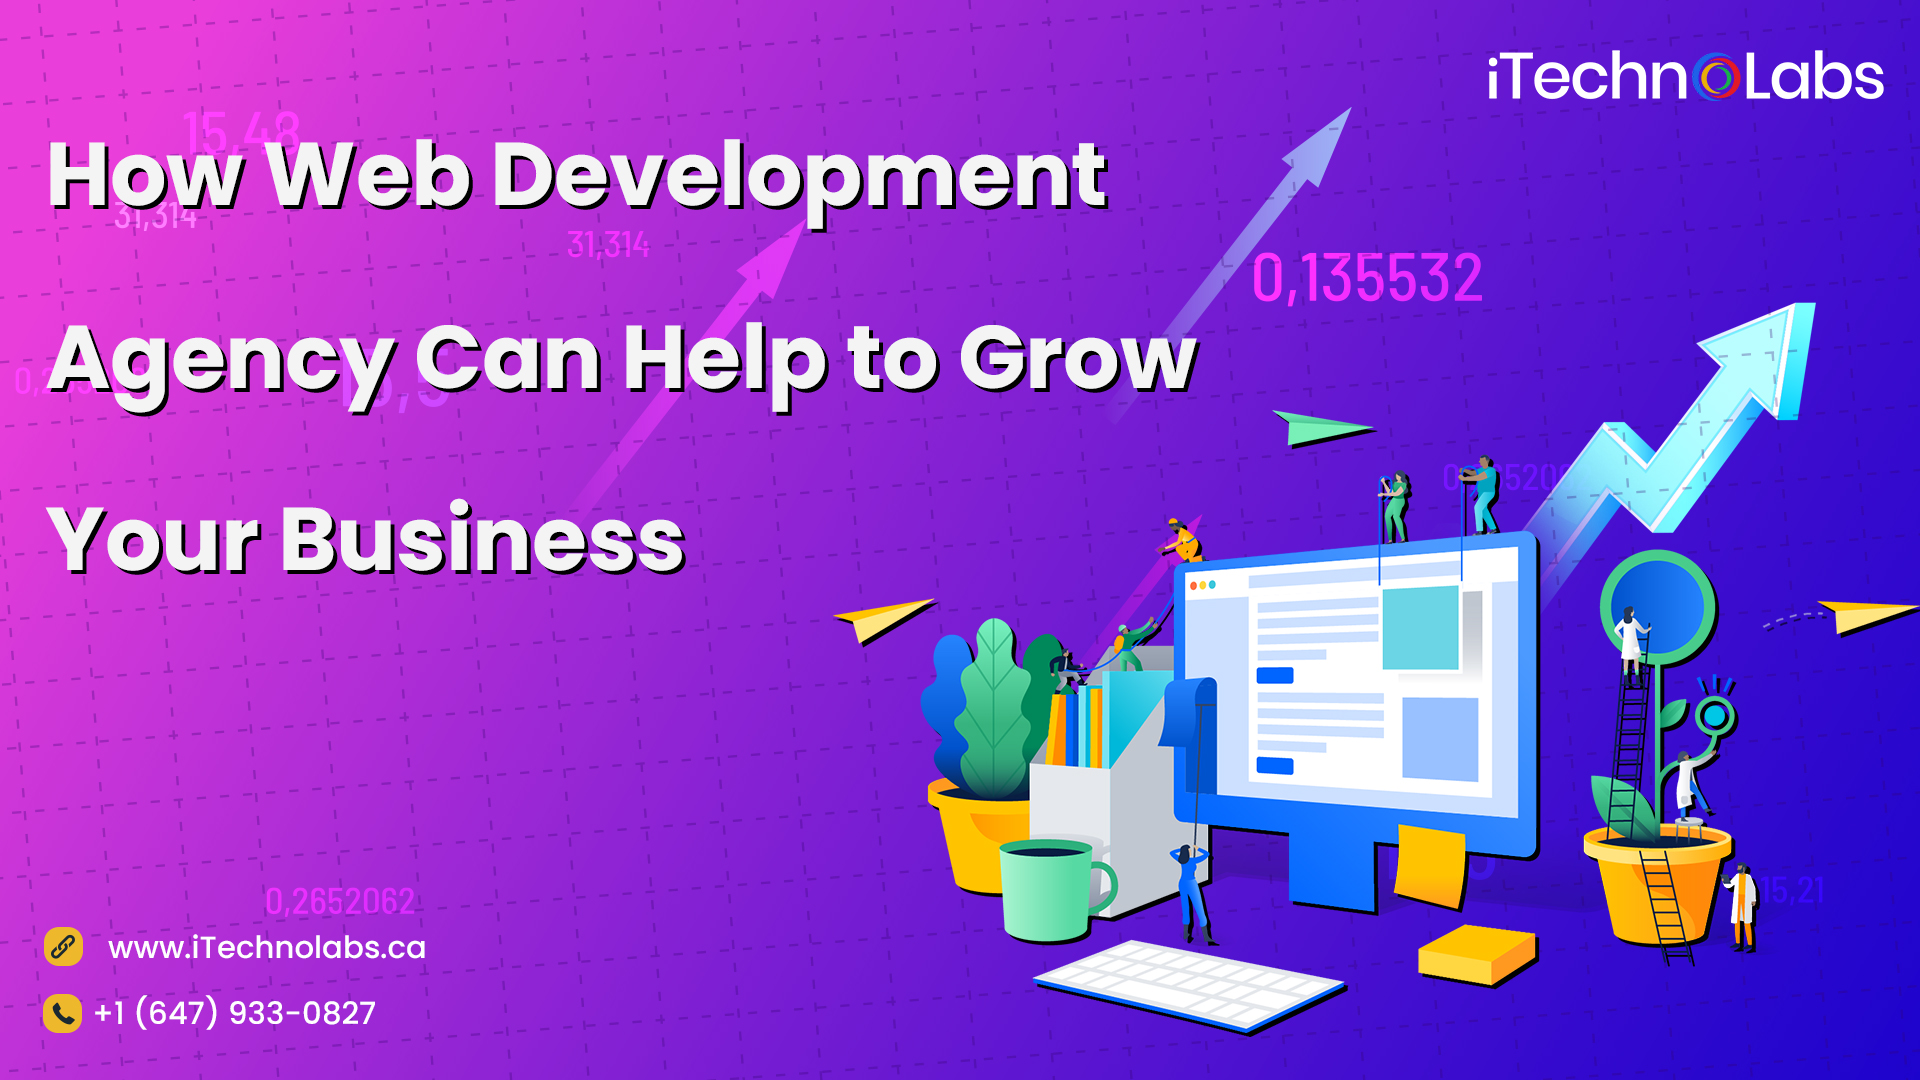 how web development agency can help to grow your business itechnolabs